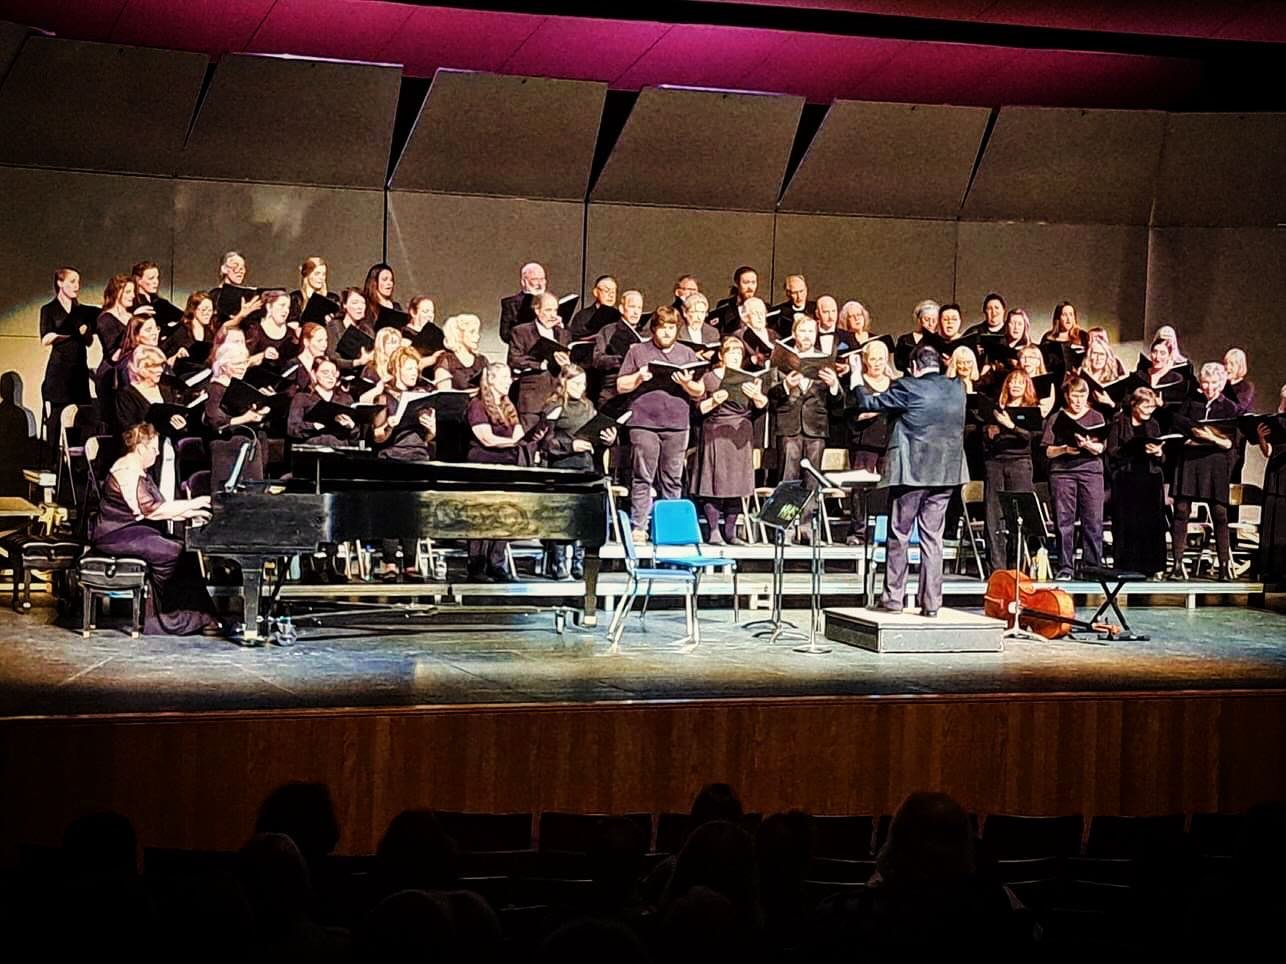 What a lovely evening spent singing! Thank you to Kyle Schneider, Mark Robinson, Ola Mullikin, Laura Norton and Beth Schneider for your leadership and artistry, to the instrumentalists who joined the concert, and to the choristers for lending their t